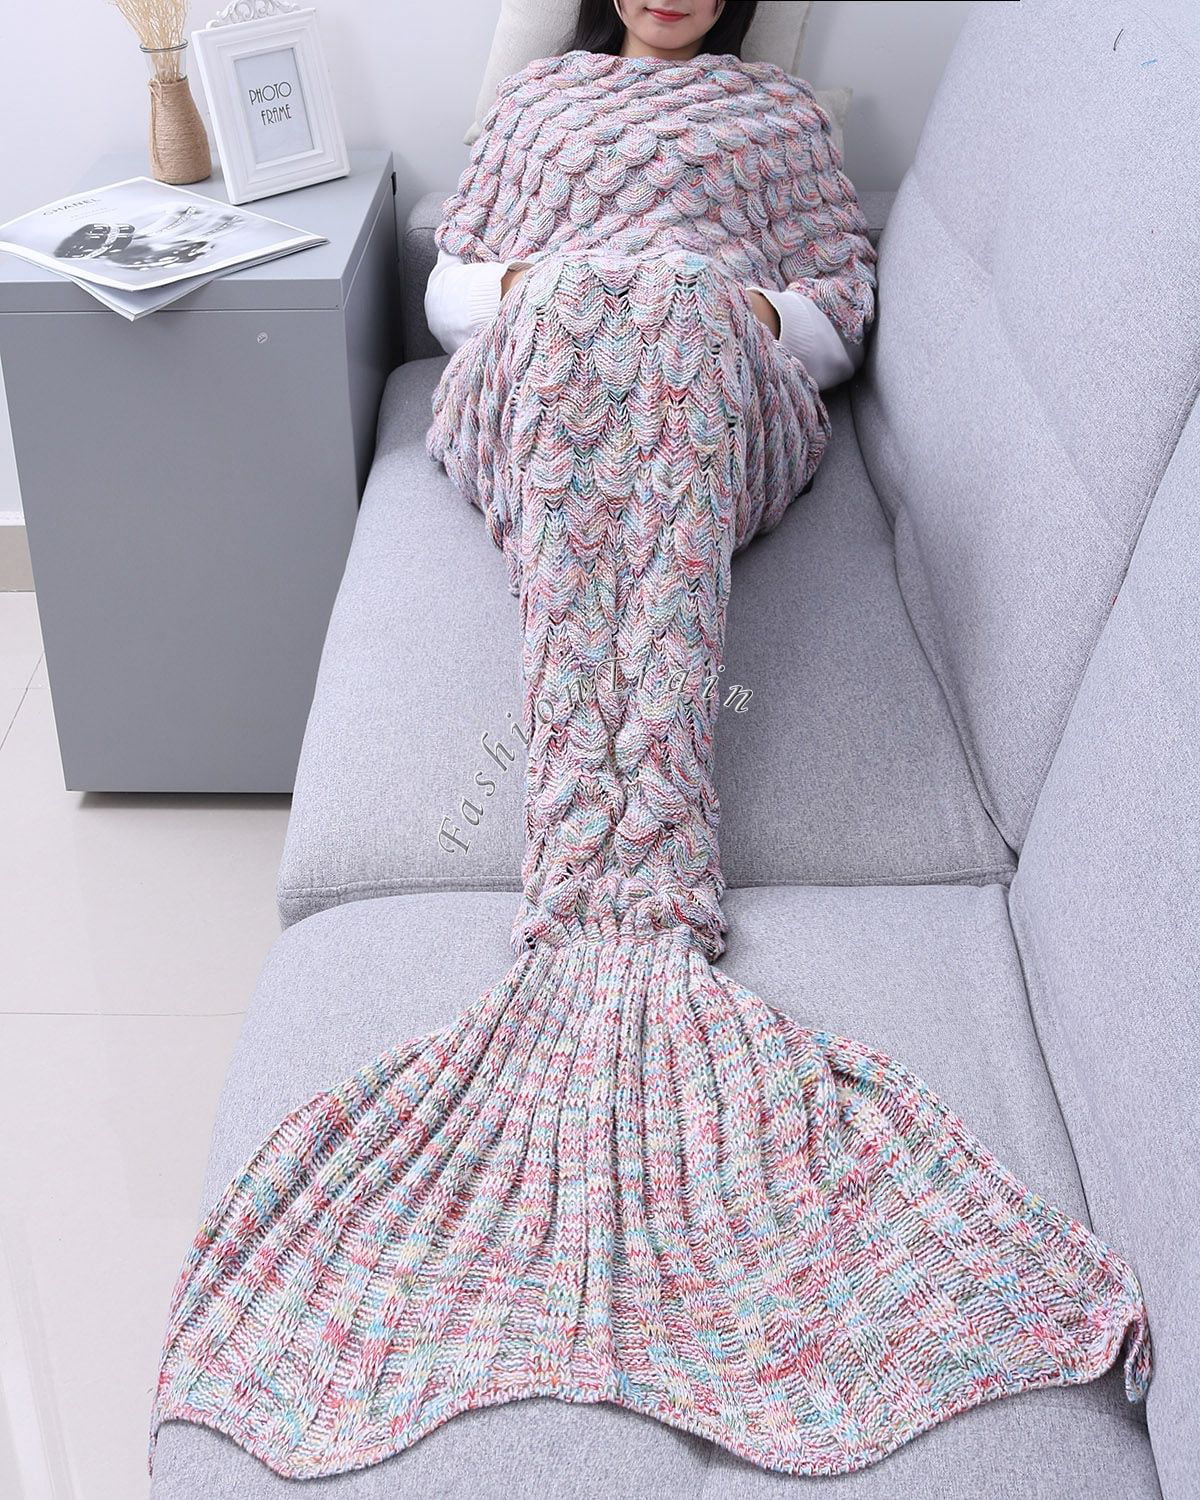 Mermaid Tail Style Sleeping Bag 170 x 60cm With Soft Carry Case 